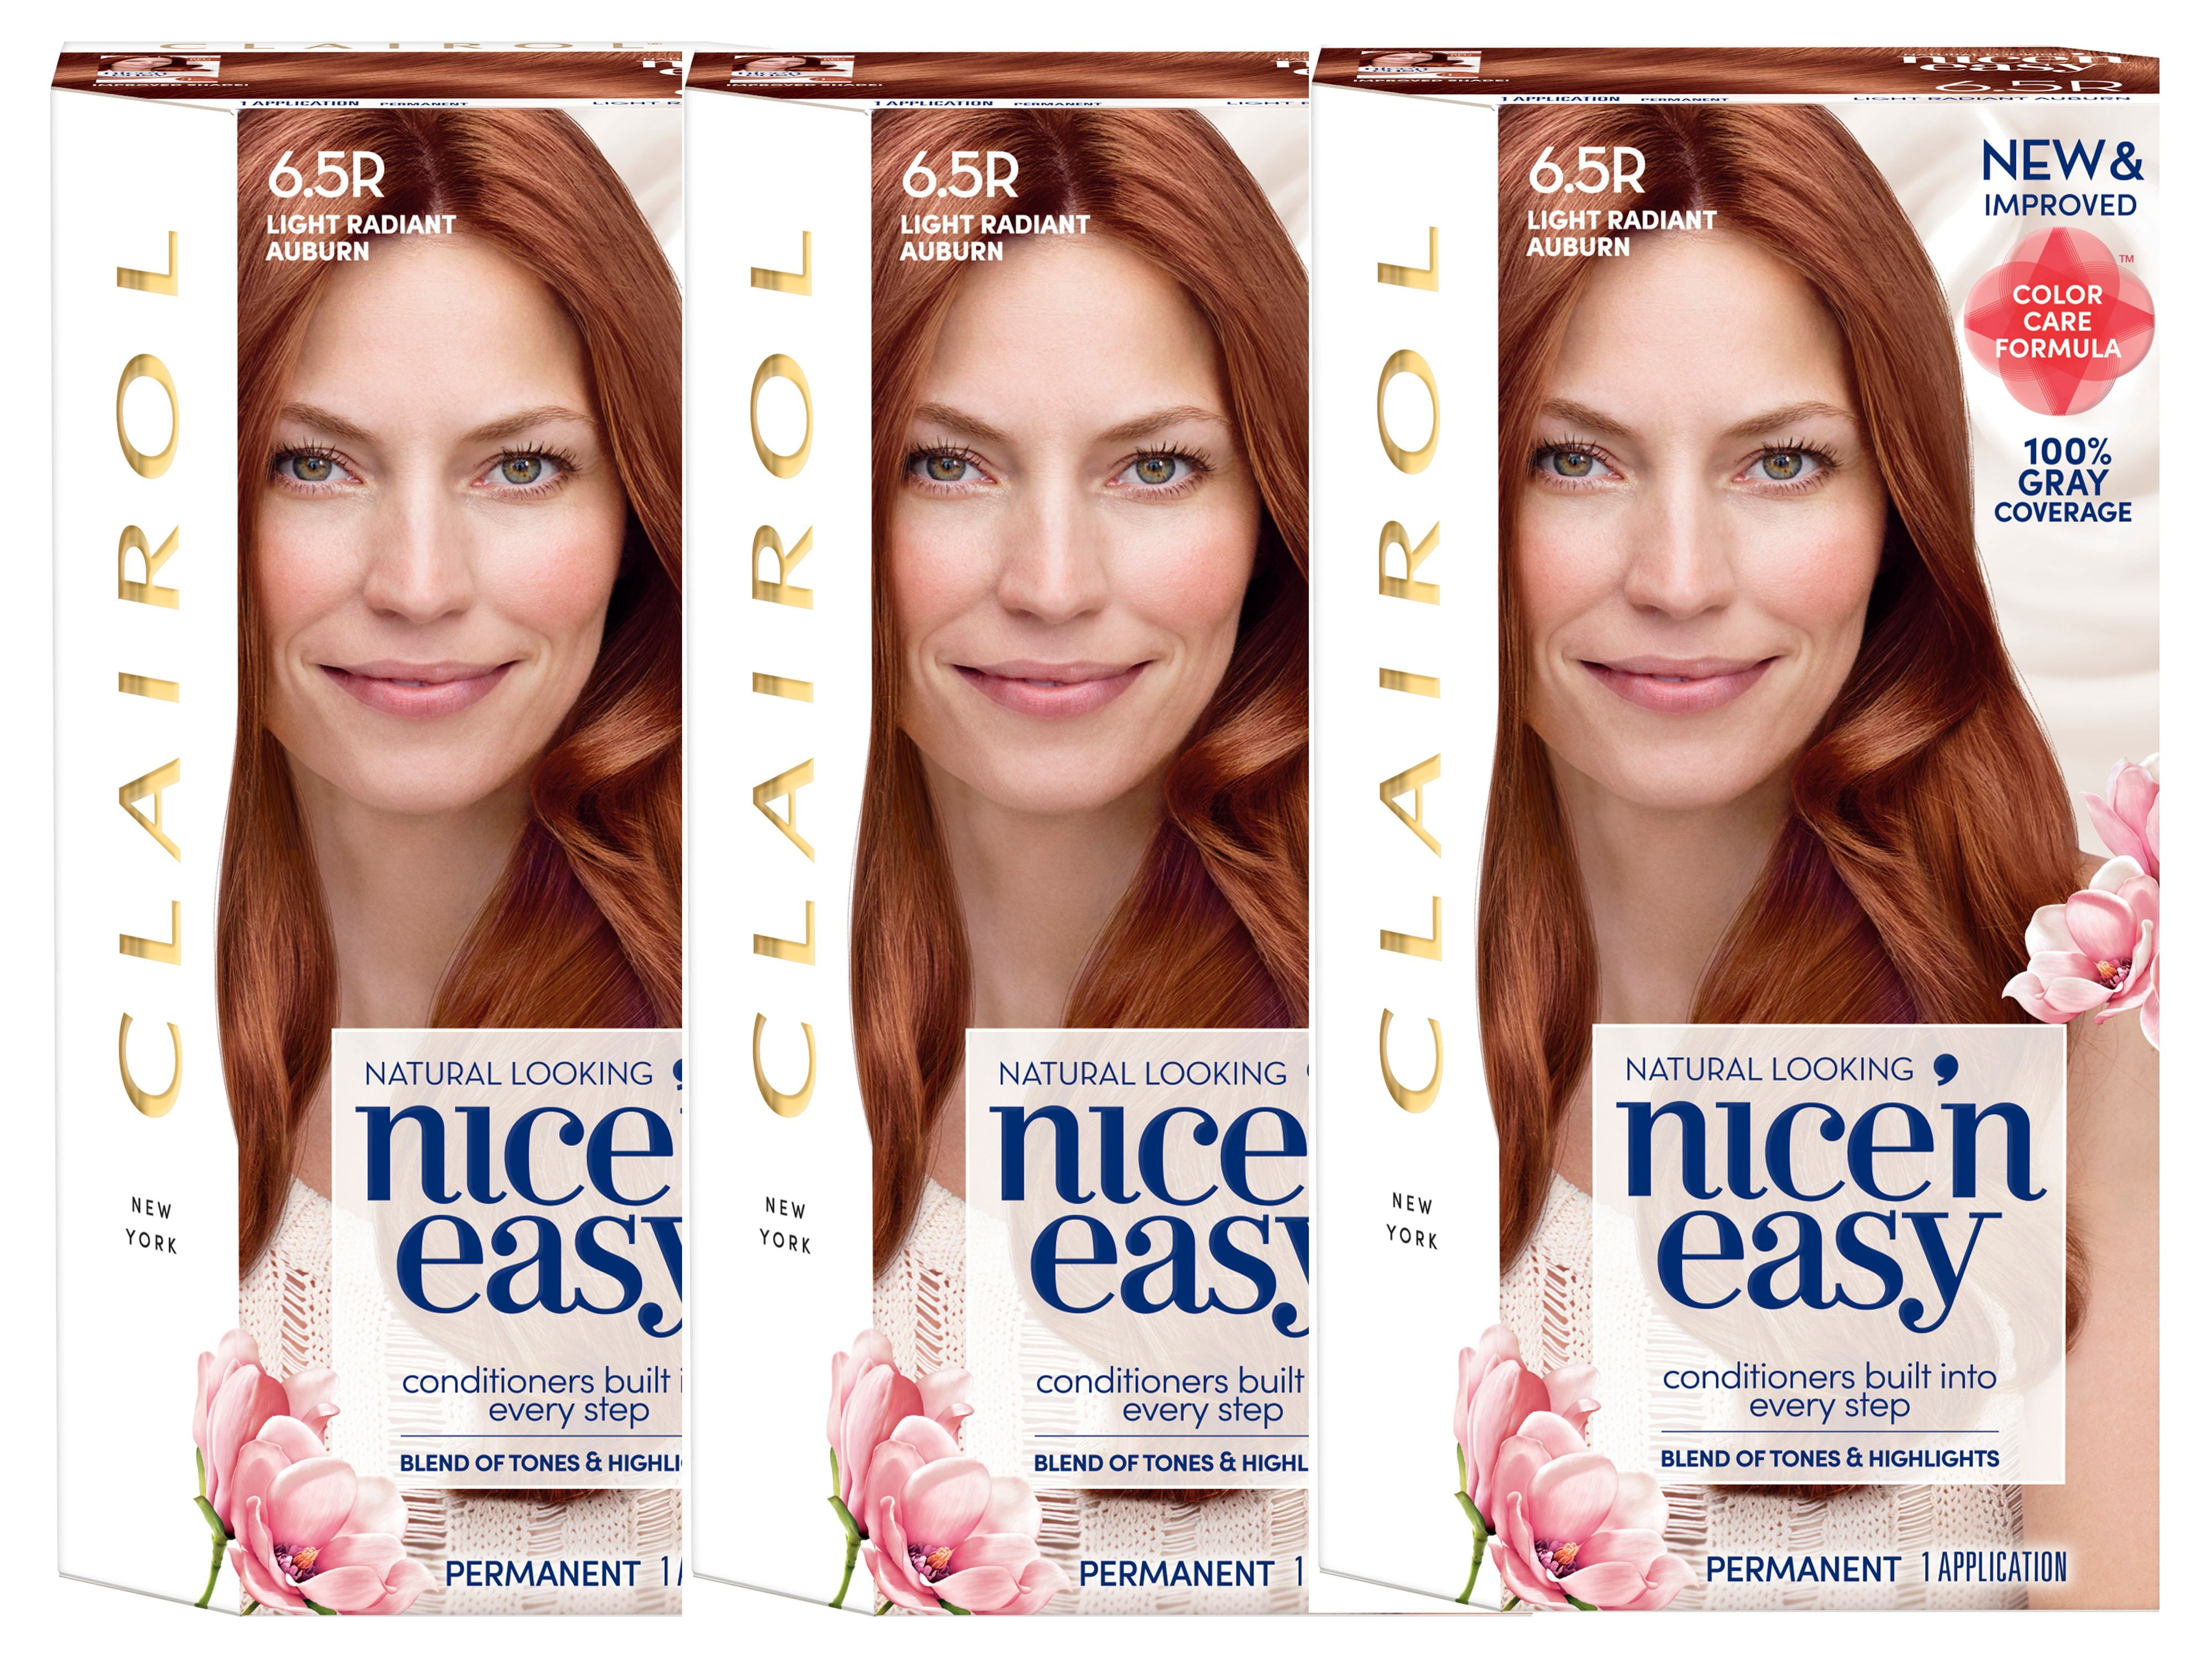 3. Clairol Nice'n Easy Permanent Hair Color, Iridescent Blonde - wide 8